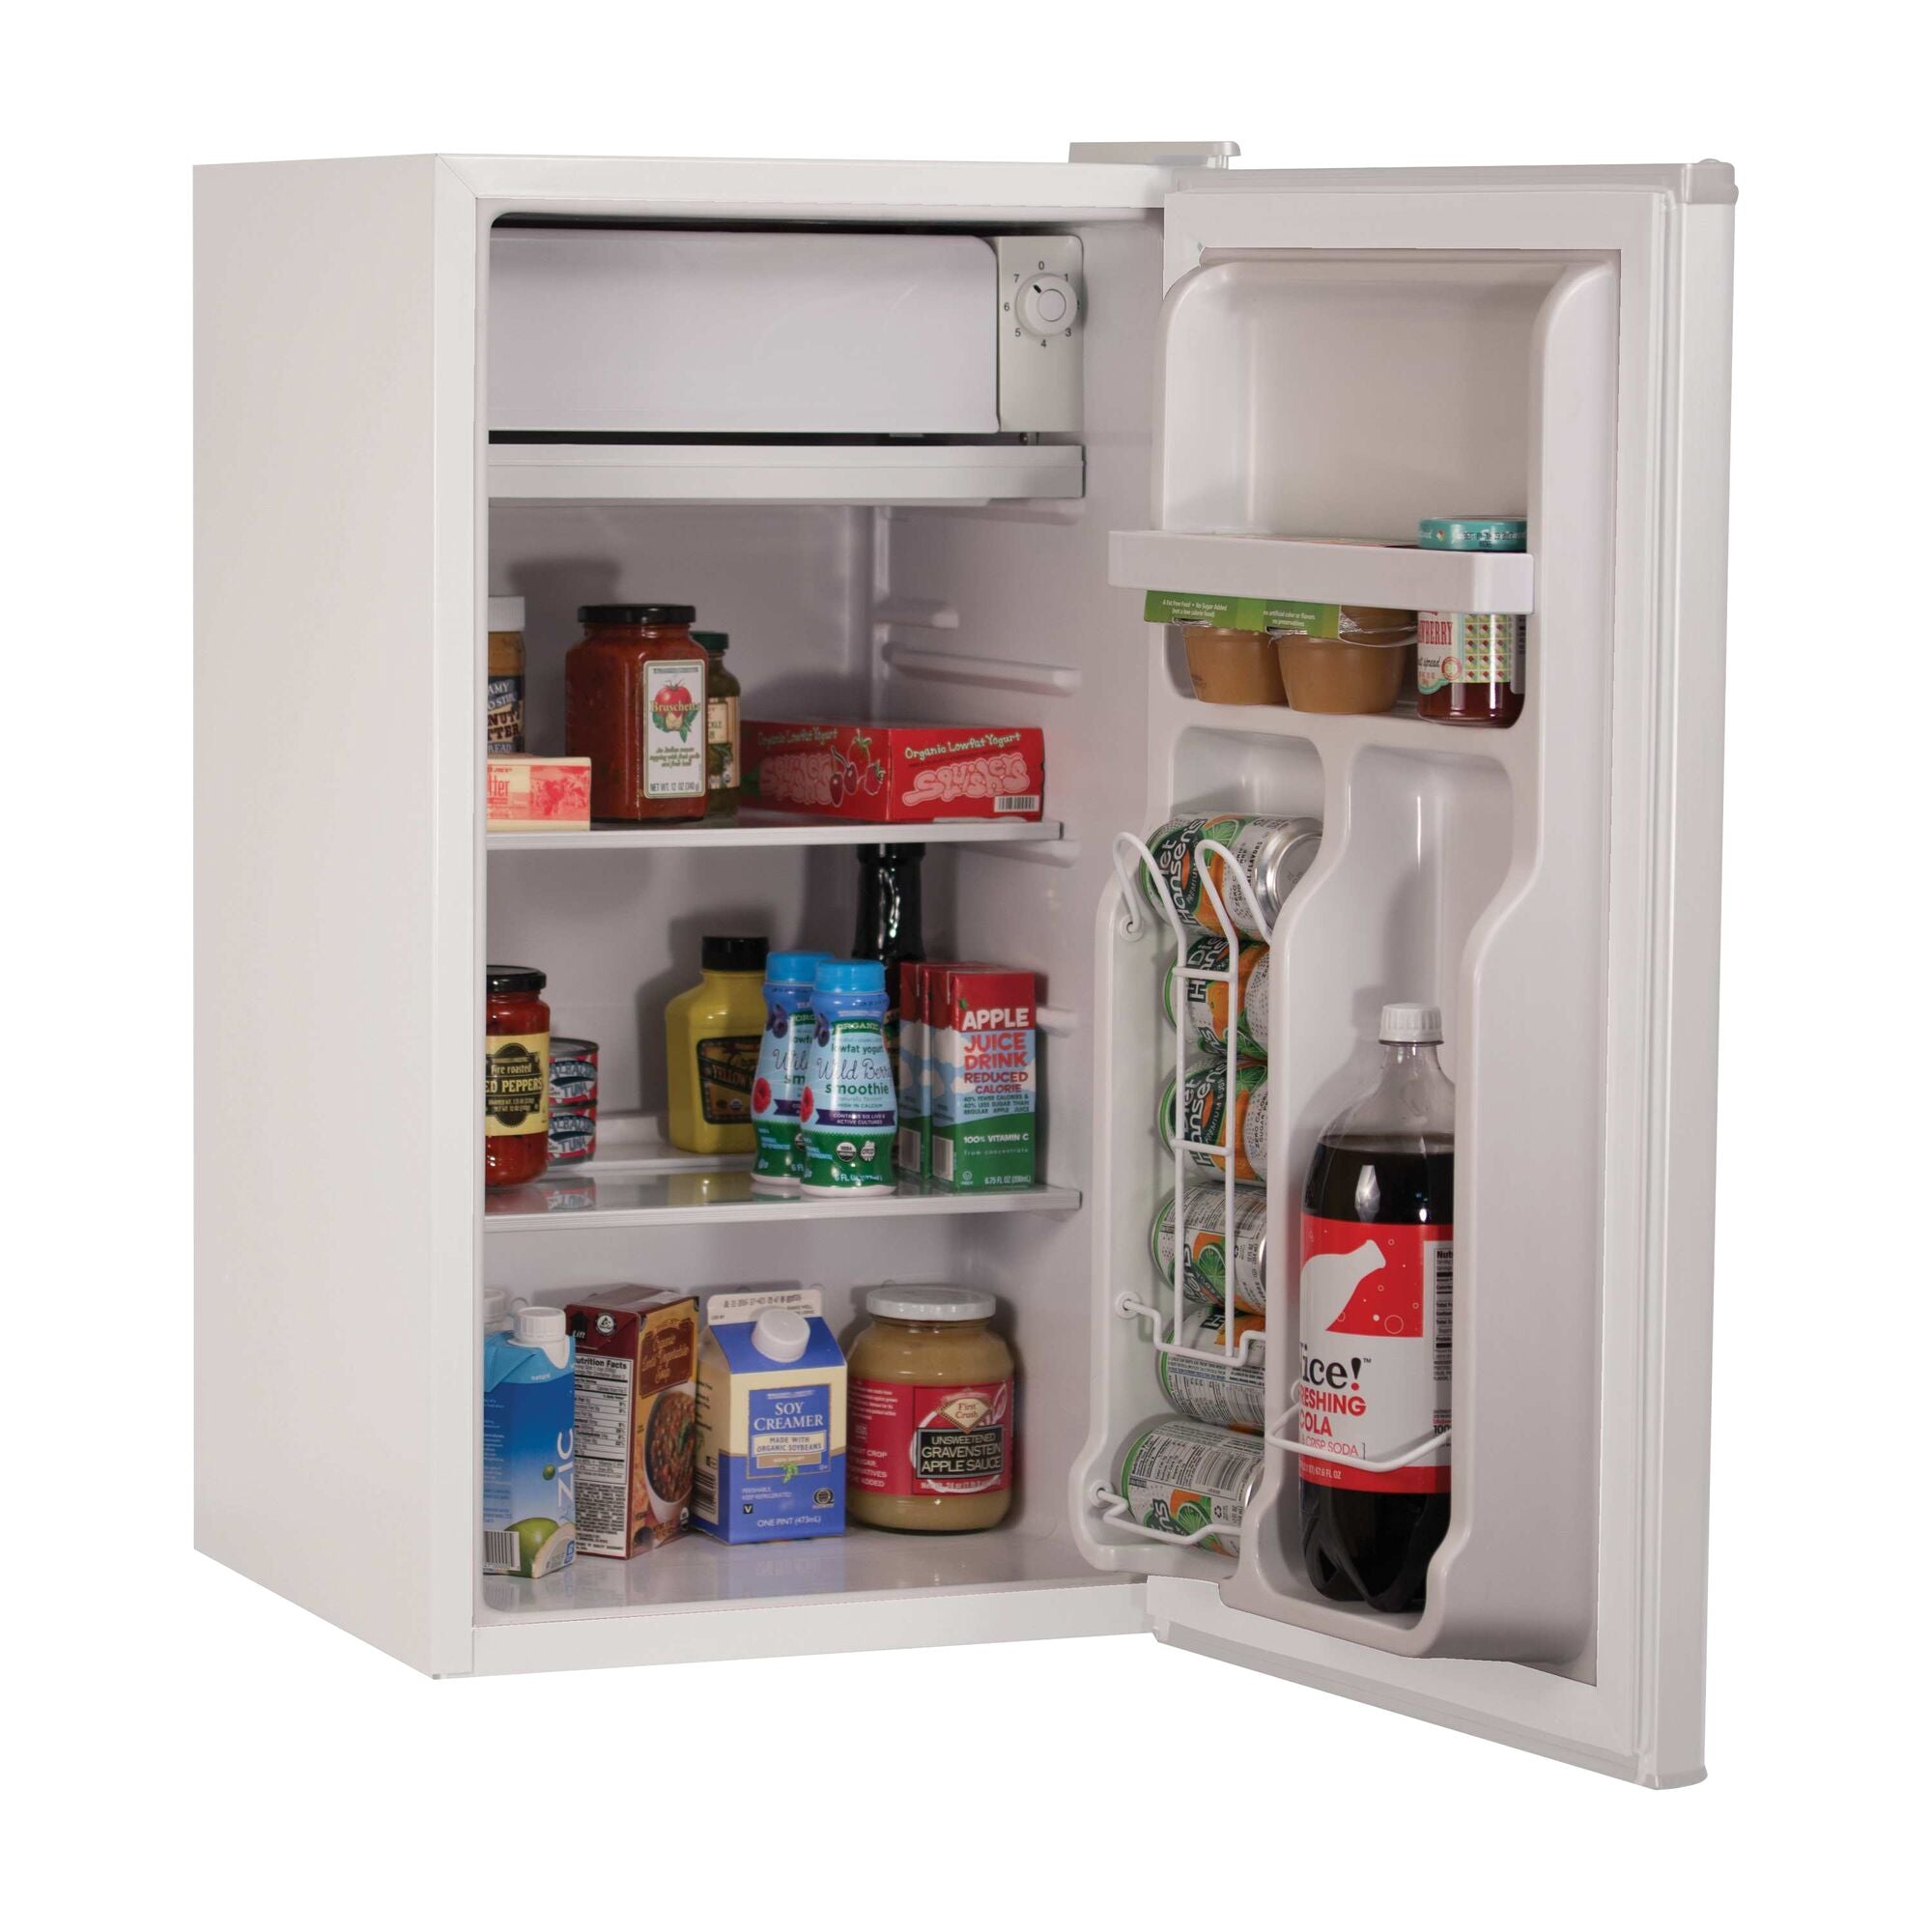 Profile of 3 and 2 tenths Cubic Foot Energy Star Refrigerator with Freezer having door opened.